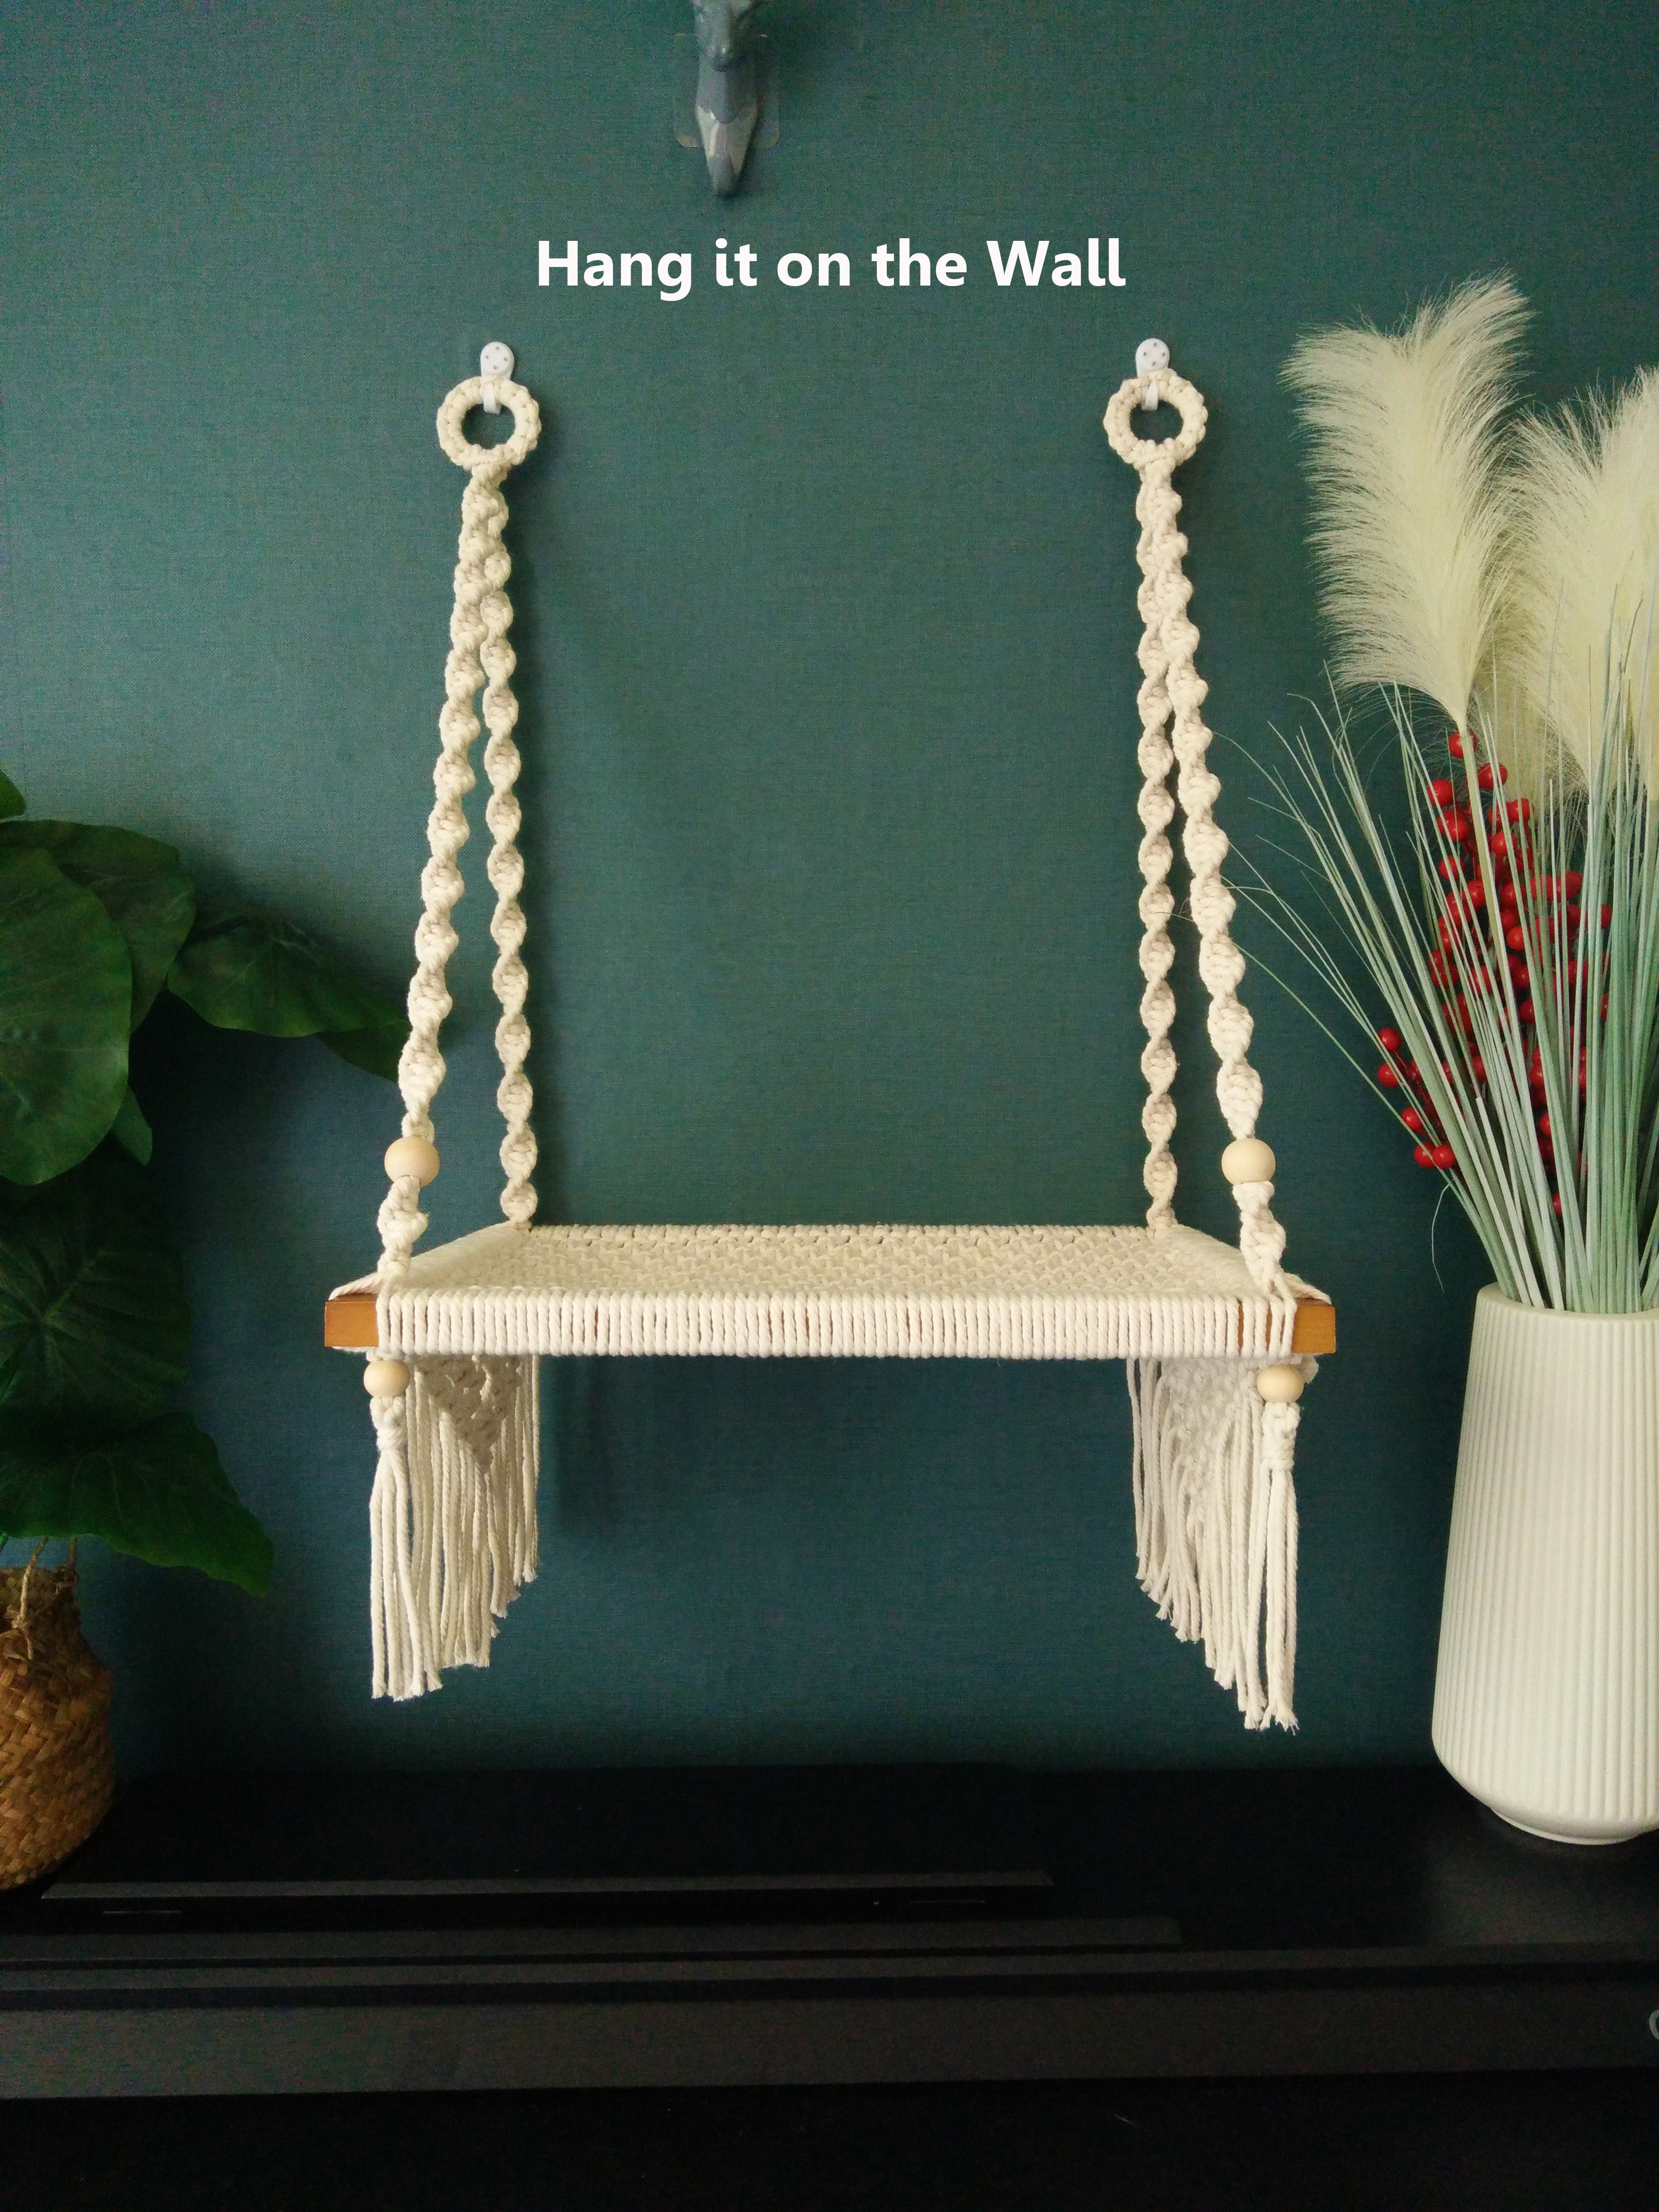 Macrame Cat wall furniture/wall bed , Cat hammock for window, hand woven pet swing bed, Boho cat wall hanging house